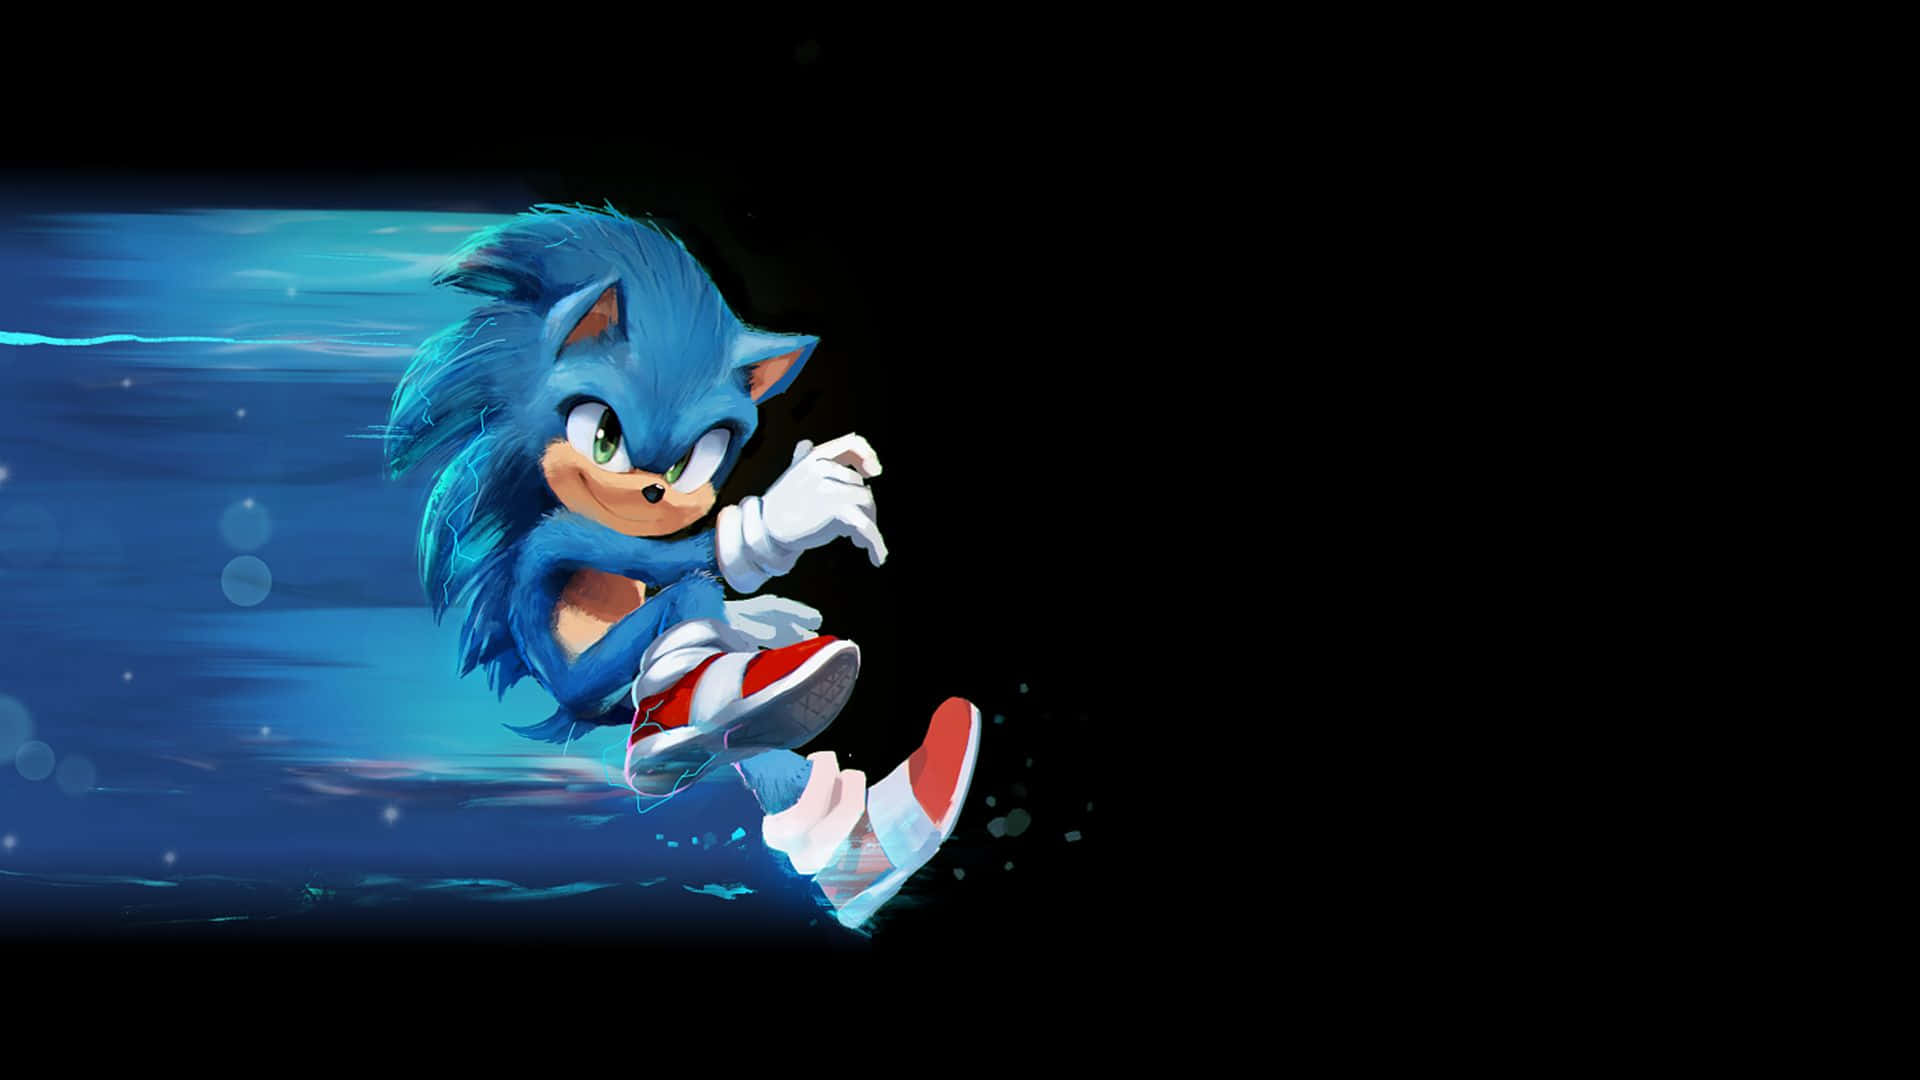 Sonic The Hedgehog is ready to blast off for an adventure! Wallpaper